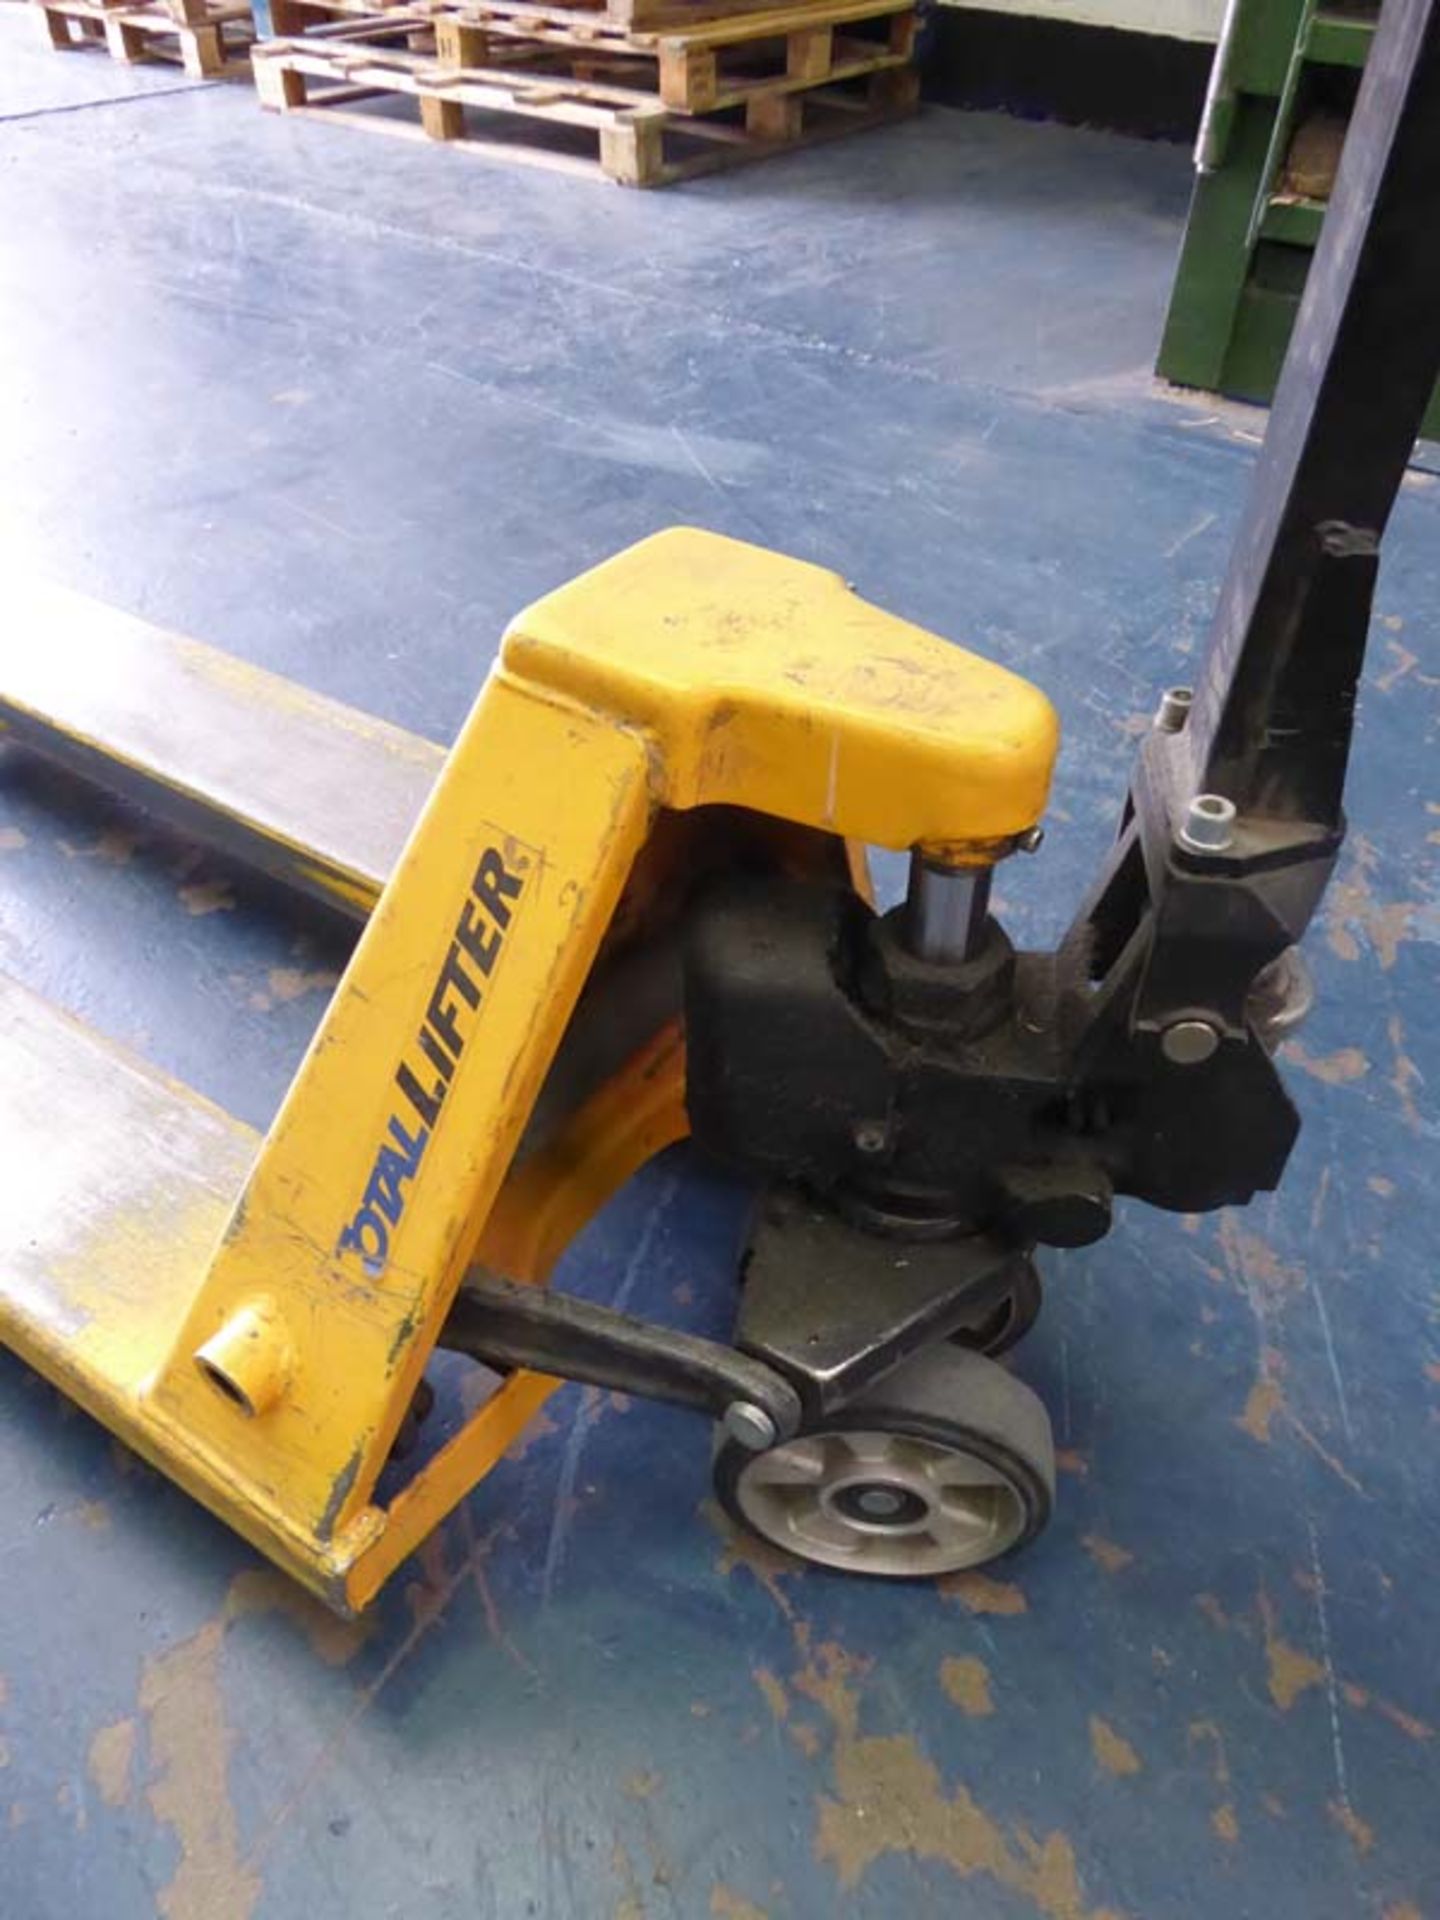 Total Lifter 2 tonne hydraulic pallet truck - Image 2 of 2